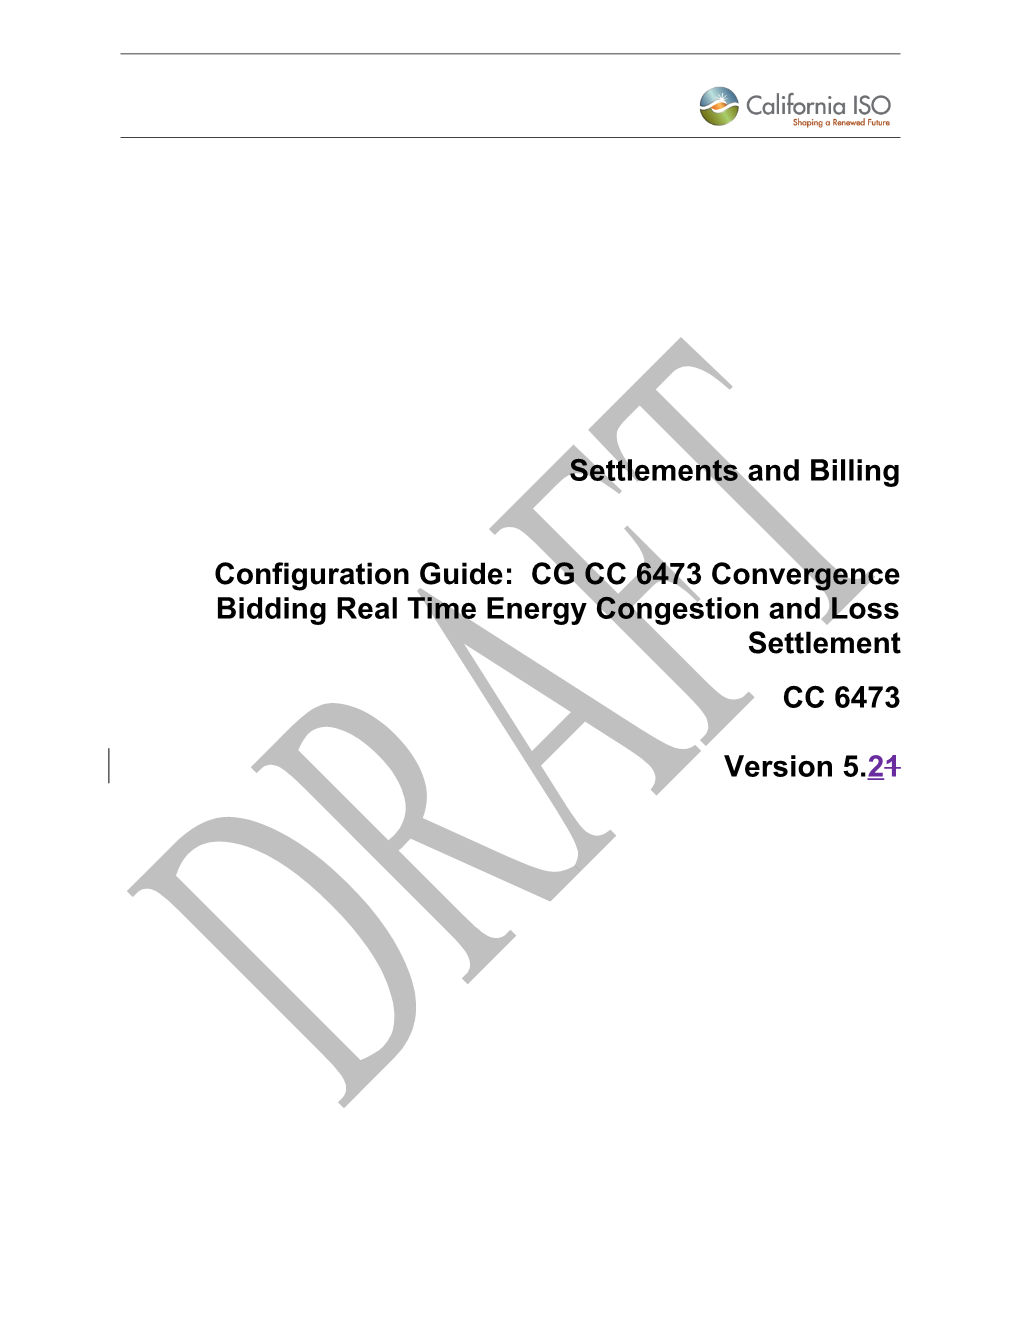 CG CC 6473 Convergence Bidding Real Time Energy Congestion and Loss Settlement